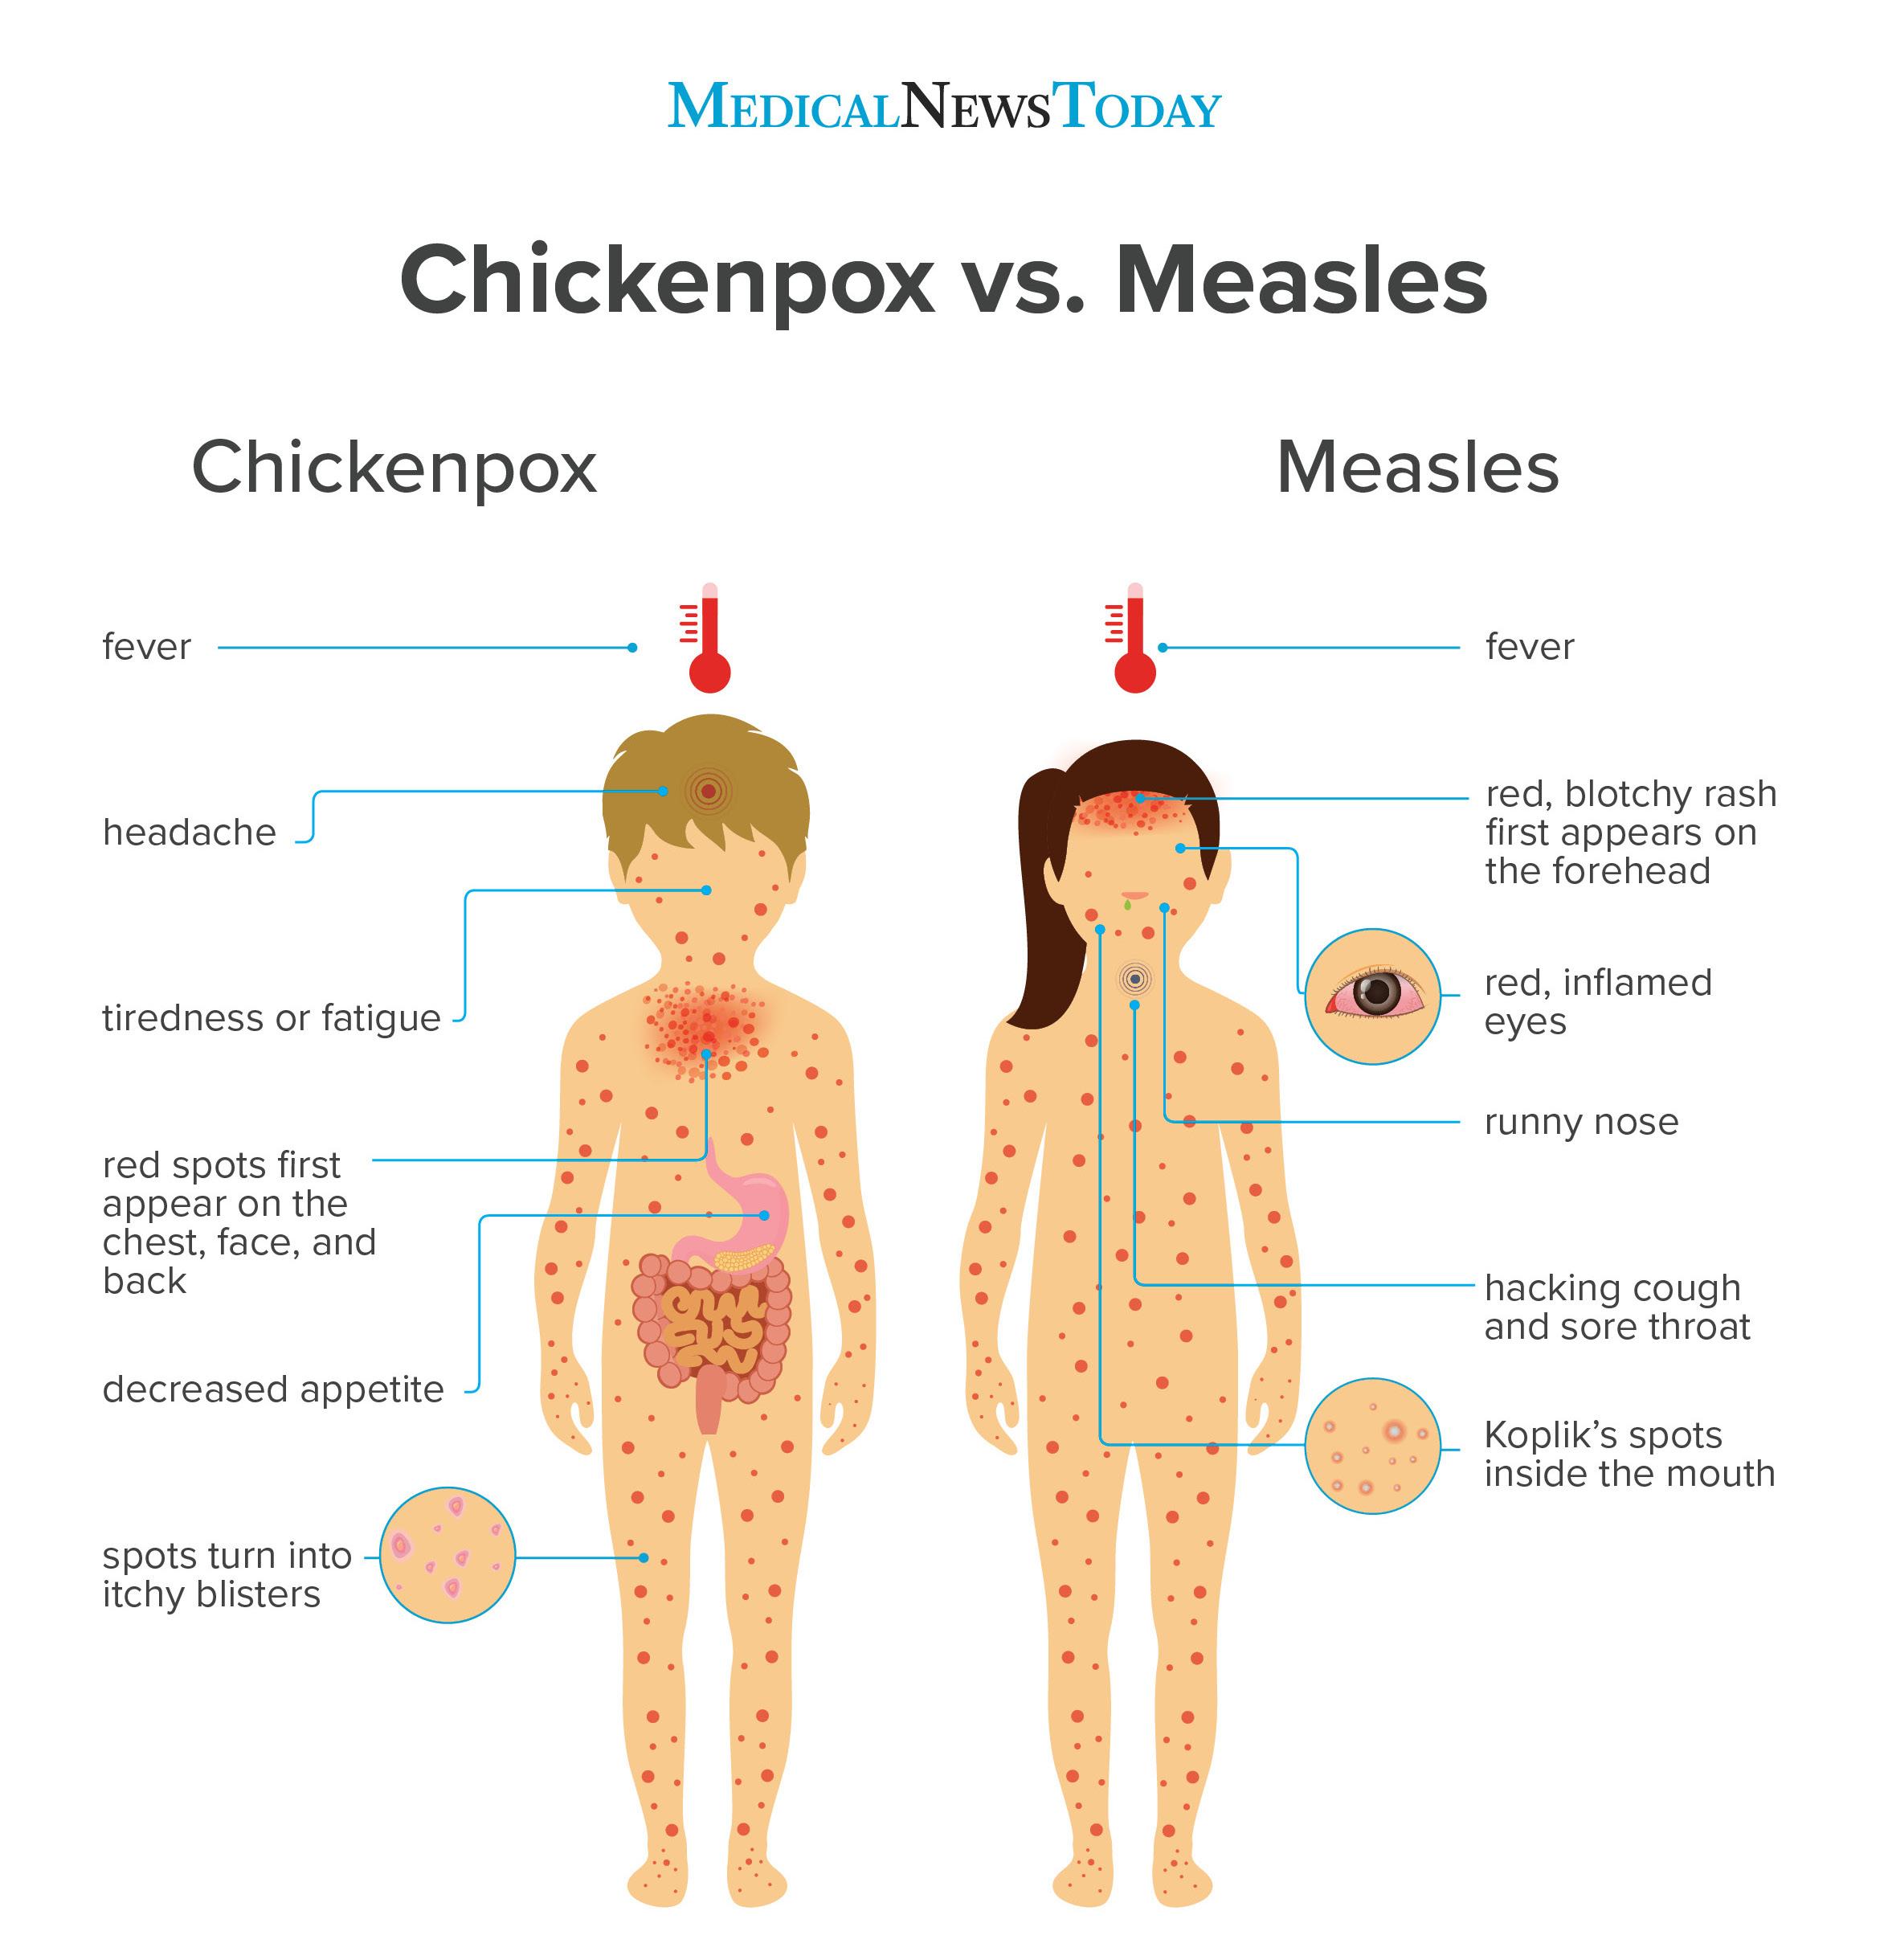 Chickenpox vs. measles: Symptoms, pictures, treatment, and more